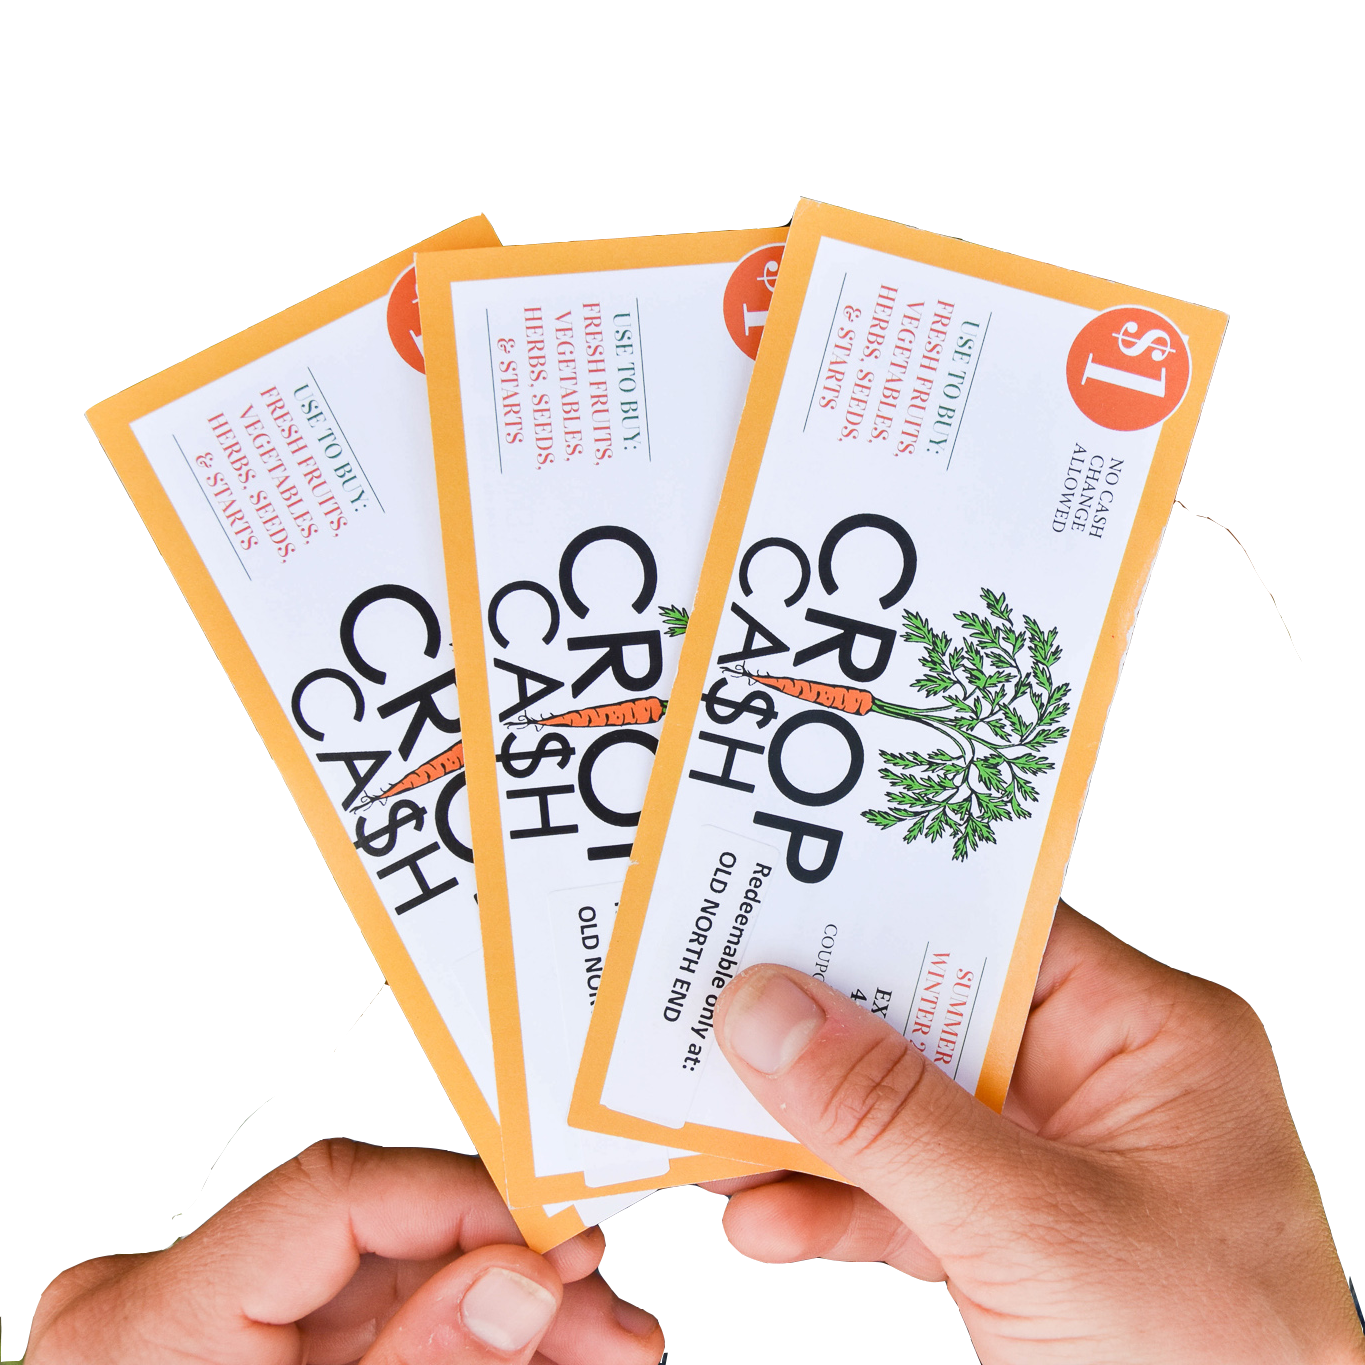 Two hands are holding coupons that read "crop cash".